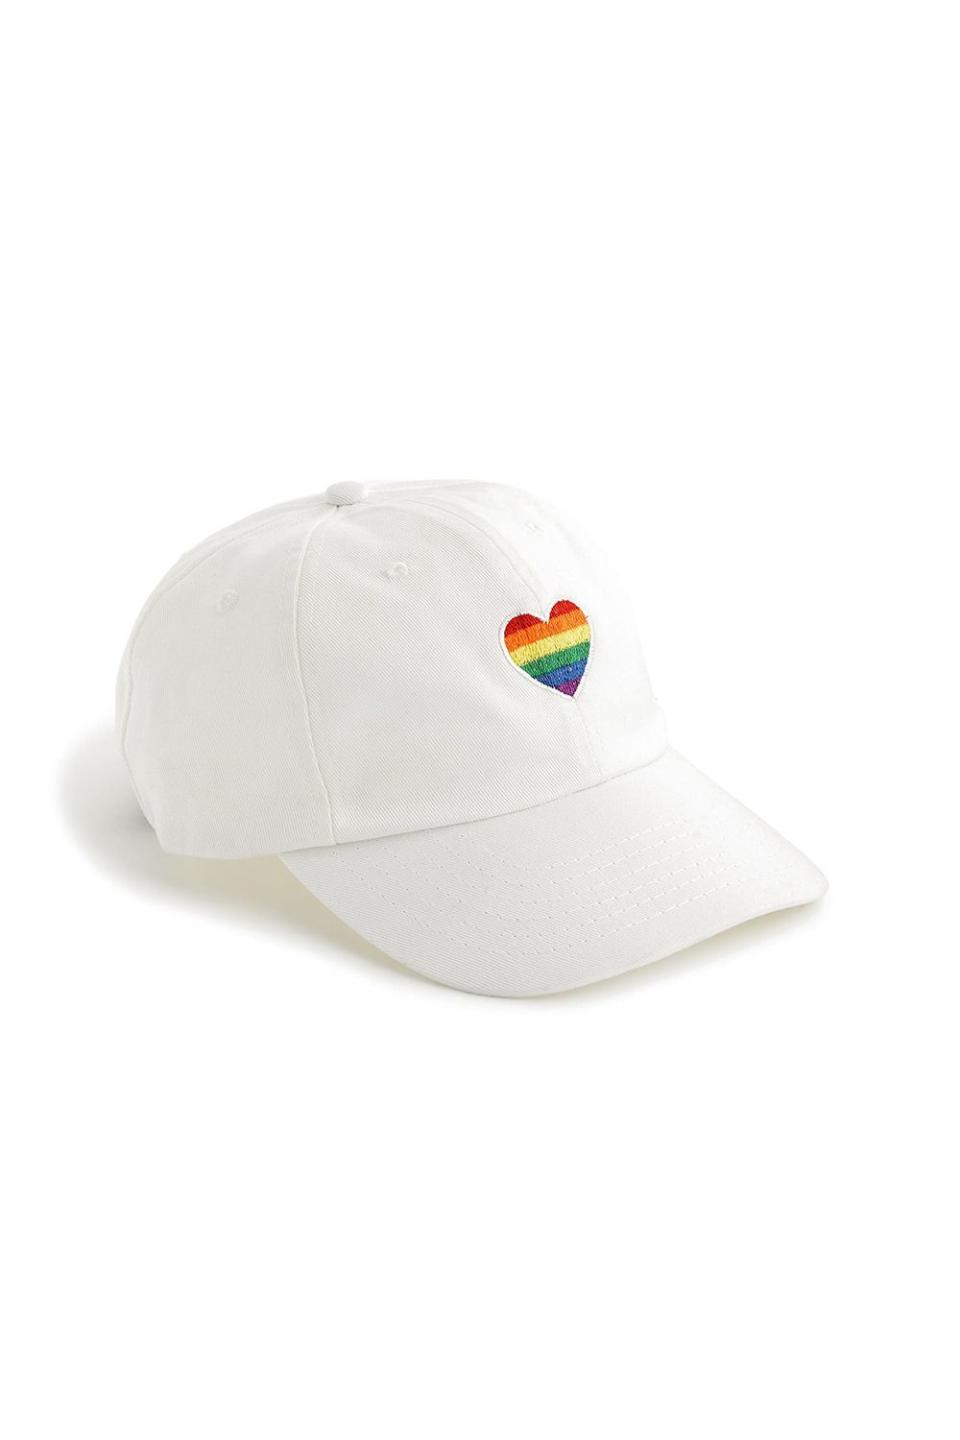 Embroidered Pride Heart Hat